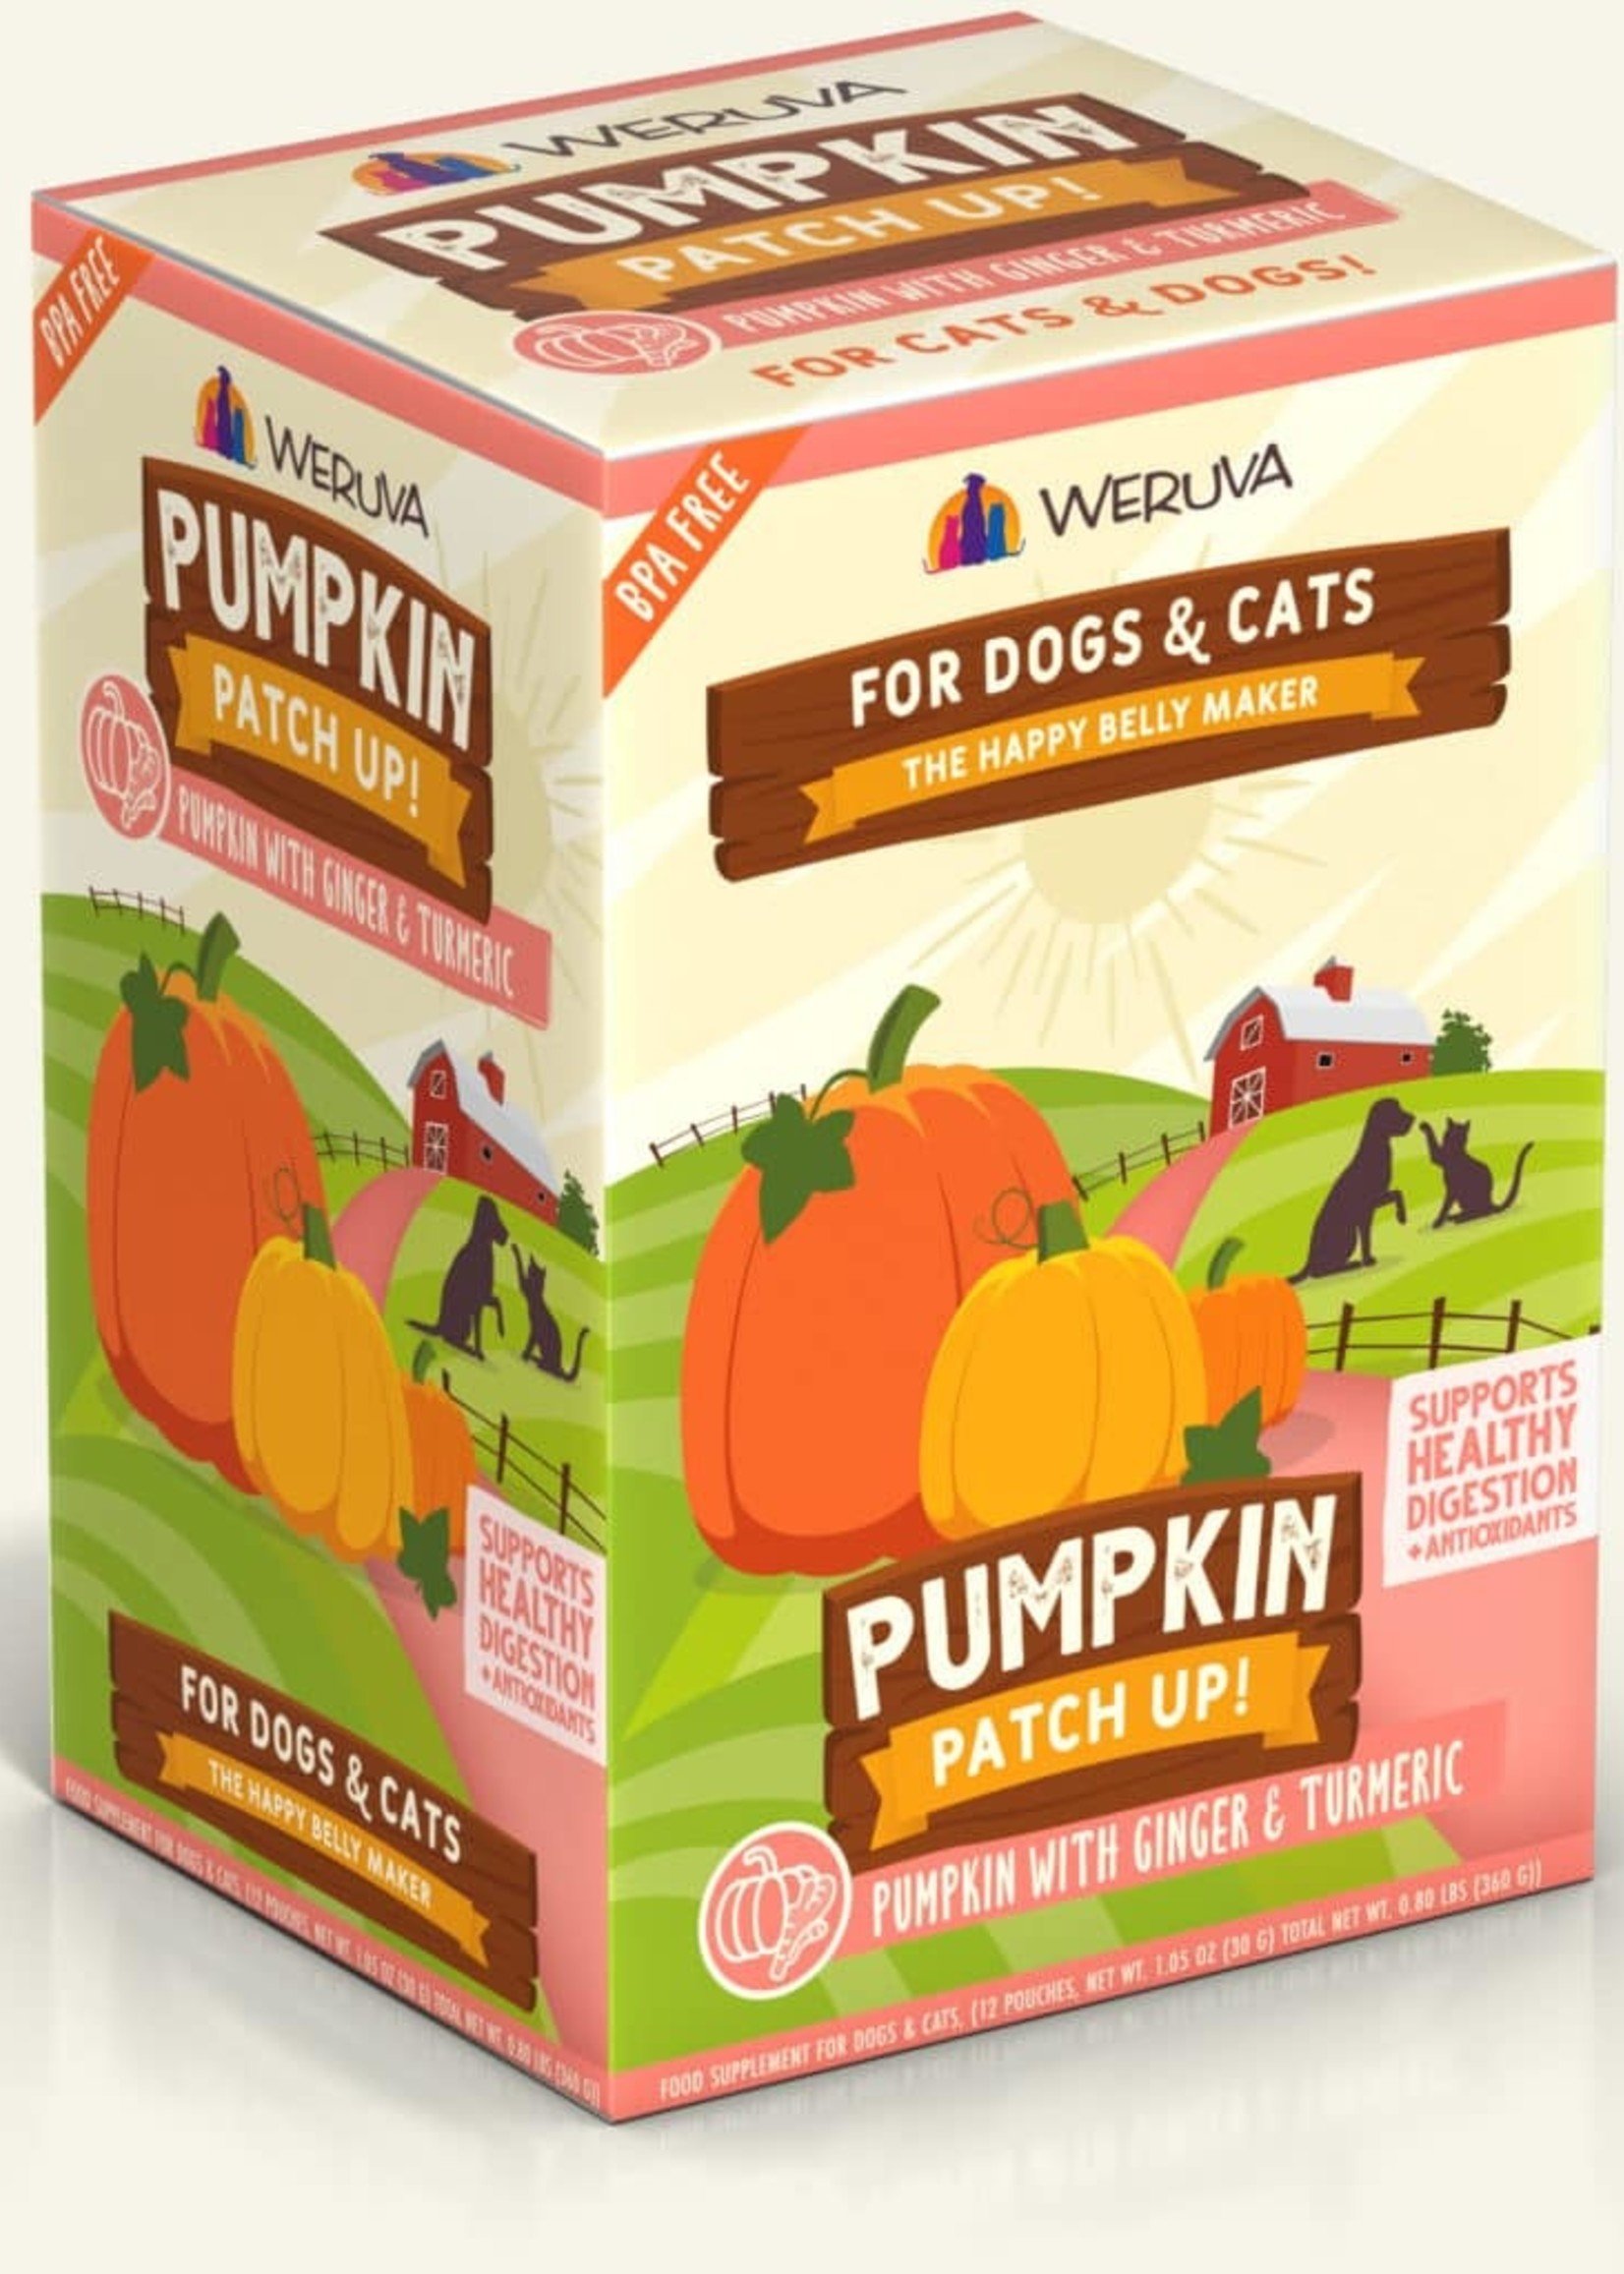 Weruva Pumpkin Patch Up!, Pumpkin with Ginger & Turmeric for Dogs & Cats, 1.05oz Pouch (Pack of 12)